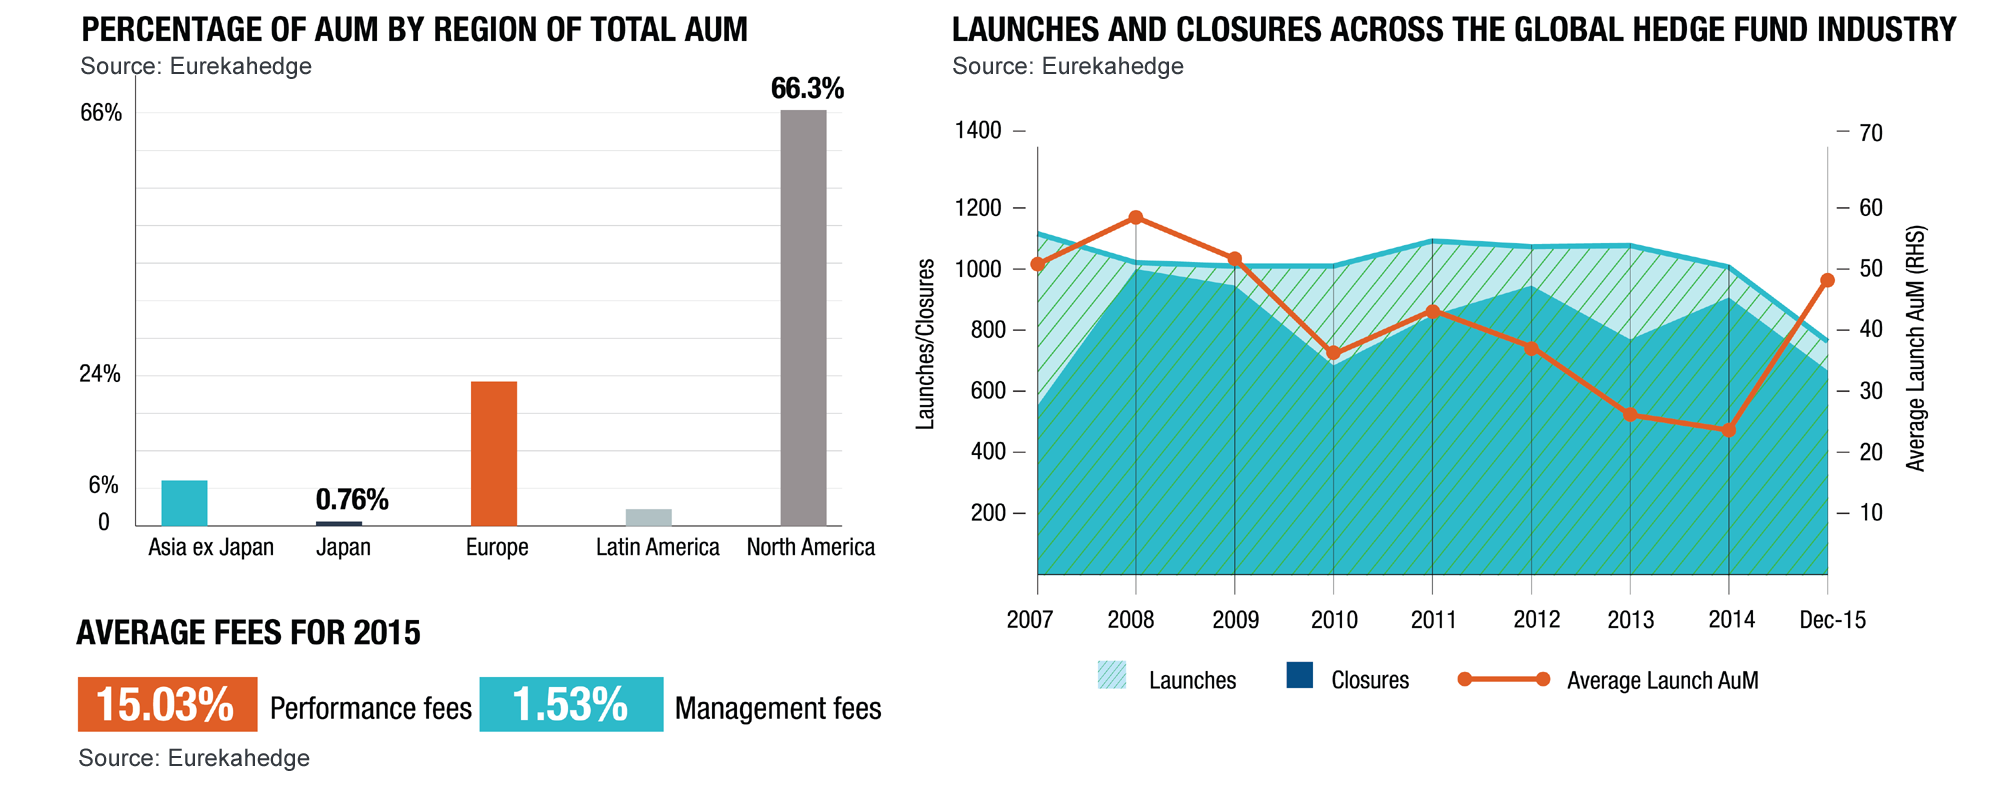 Hedge Funds 2015 Overview Infographic - Hedge fund AUM, launches and closures across the global hedge fund industry